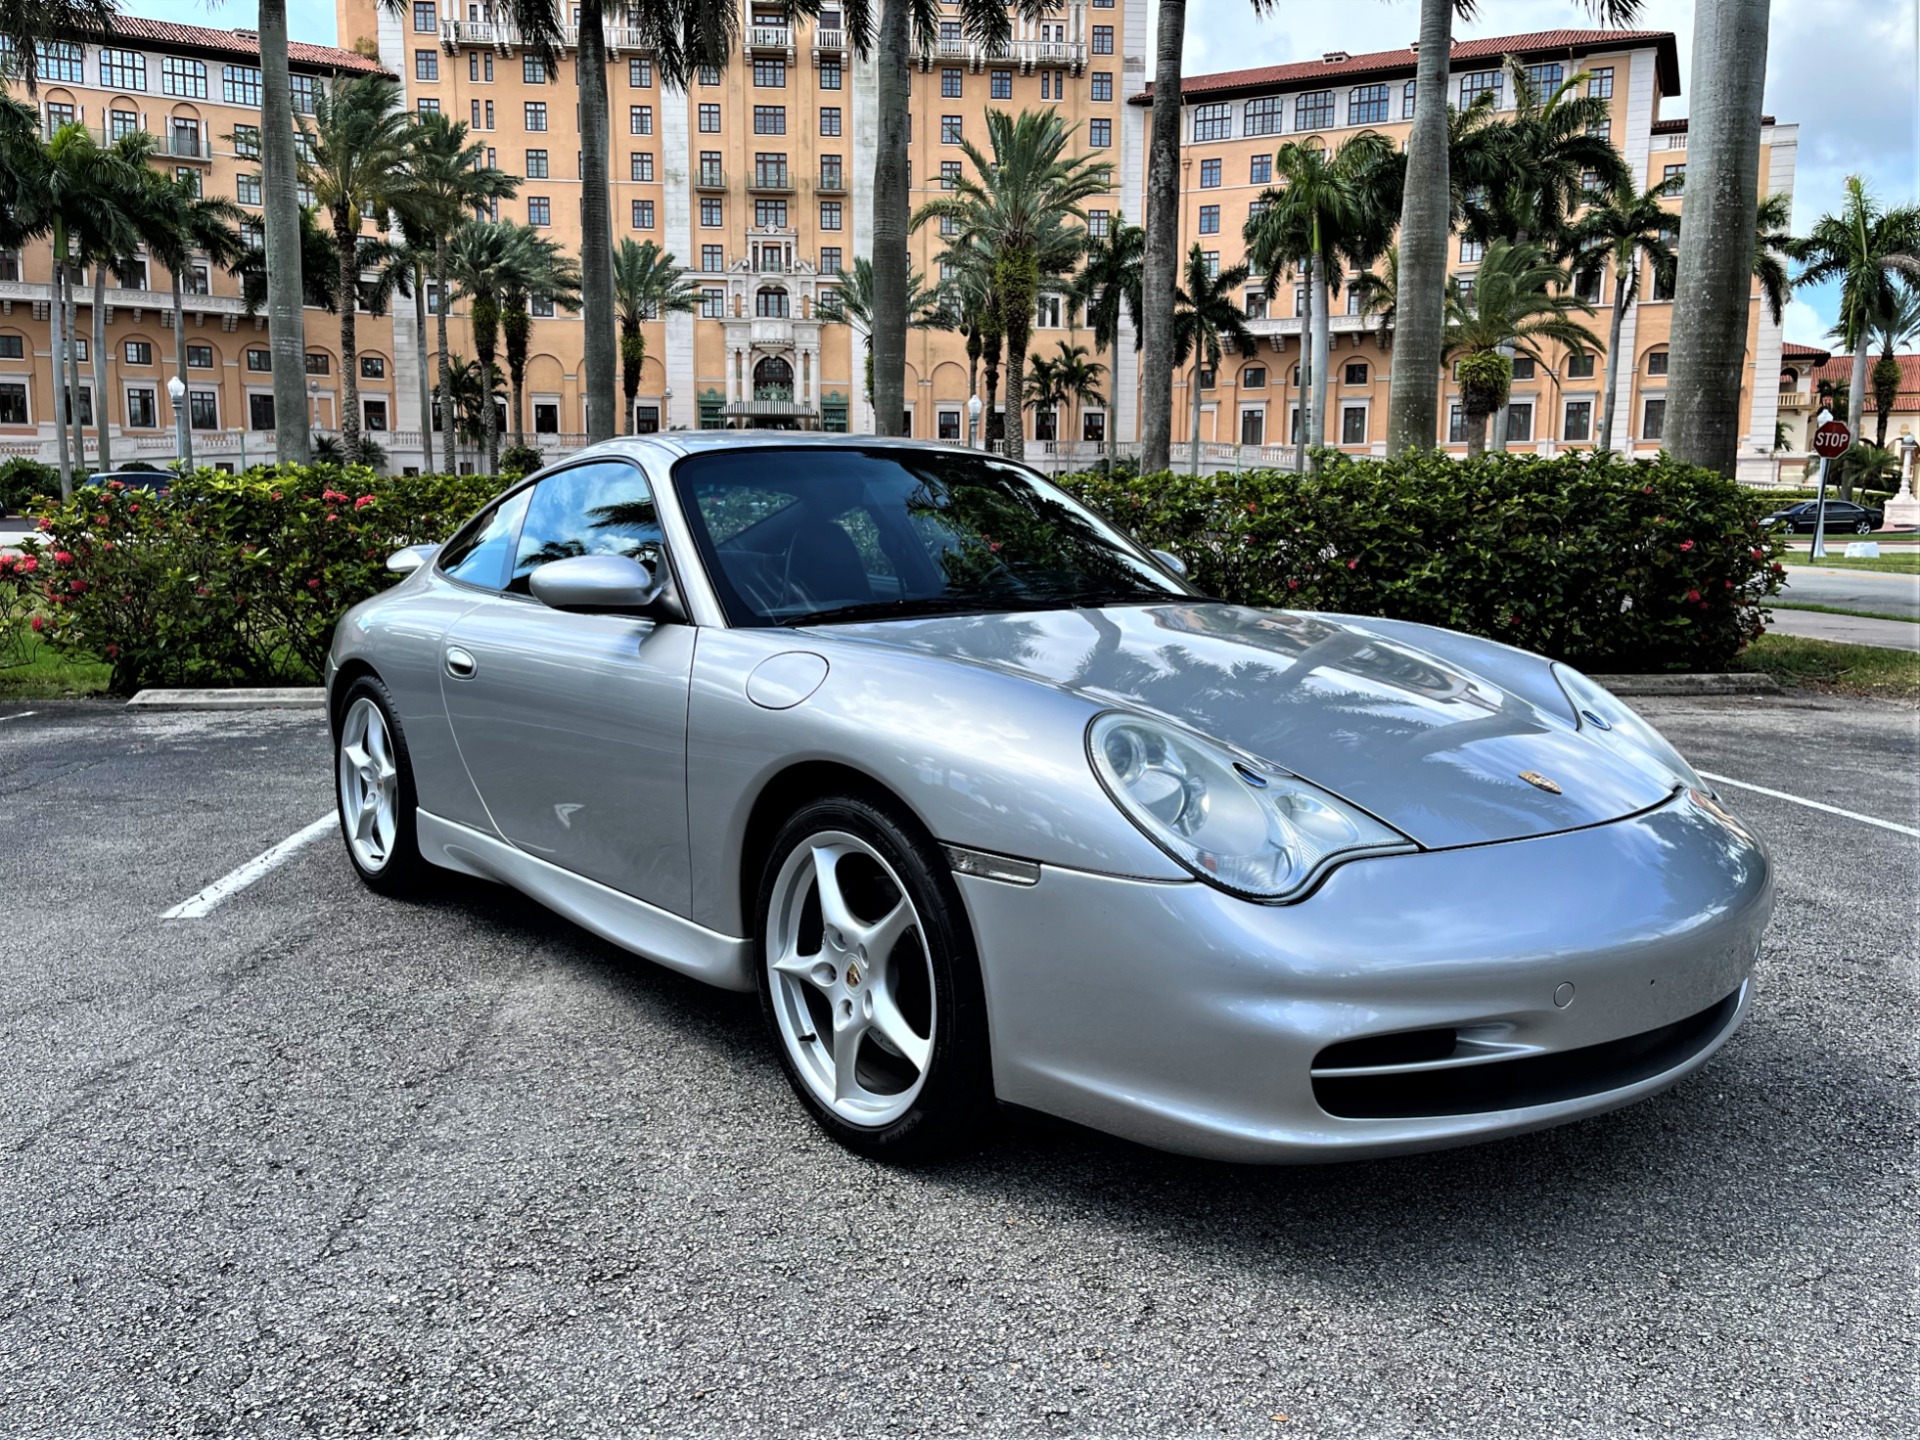 Used 2002 Porsche 911 Carrera for sale Sold at The Gables Sports Cars in Miami FL 33146 4